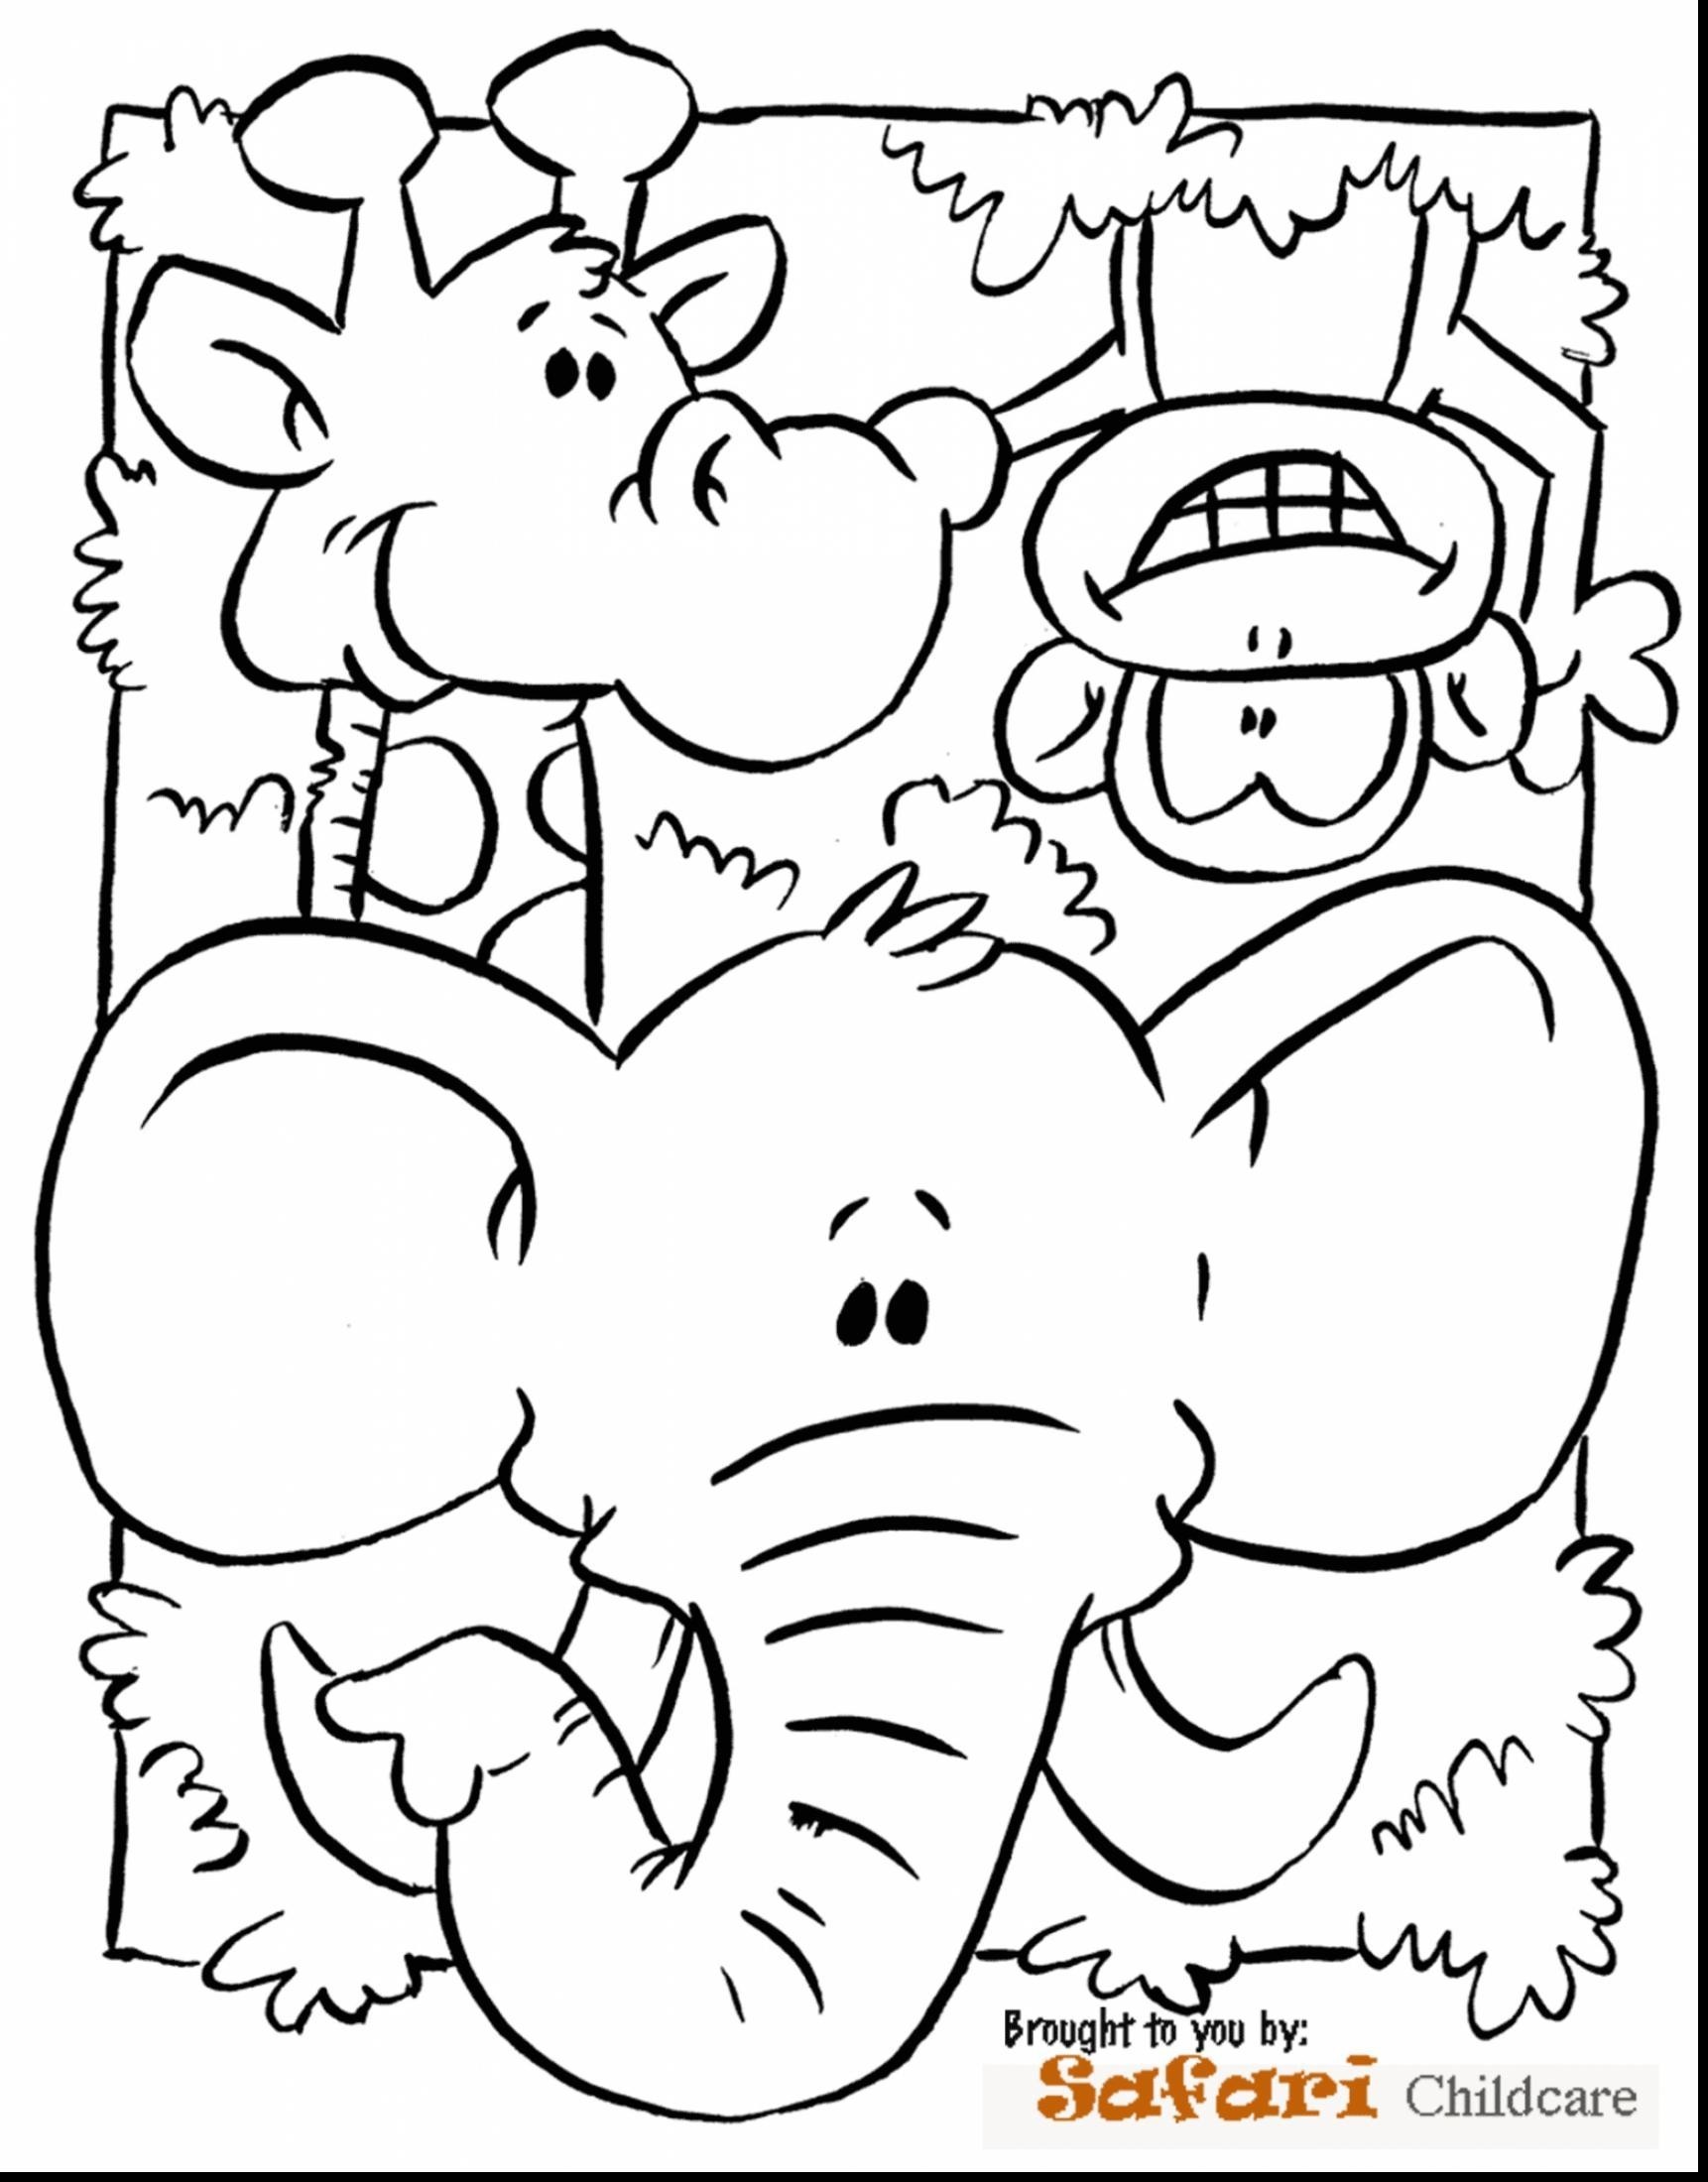 Forest Animals Coloring Page Preschool Jungle themed Printables Inspirationa top Jungle Animals